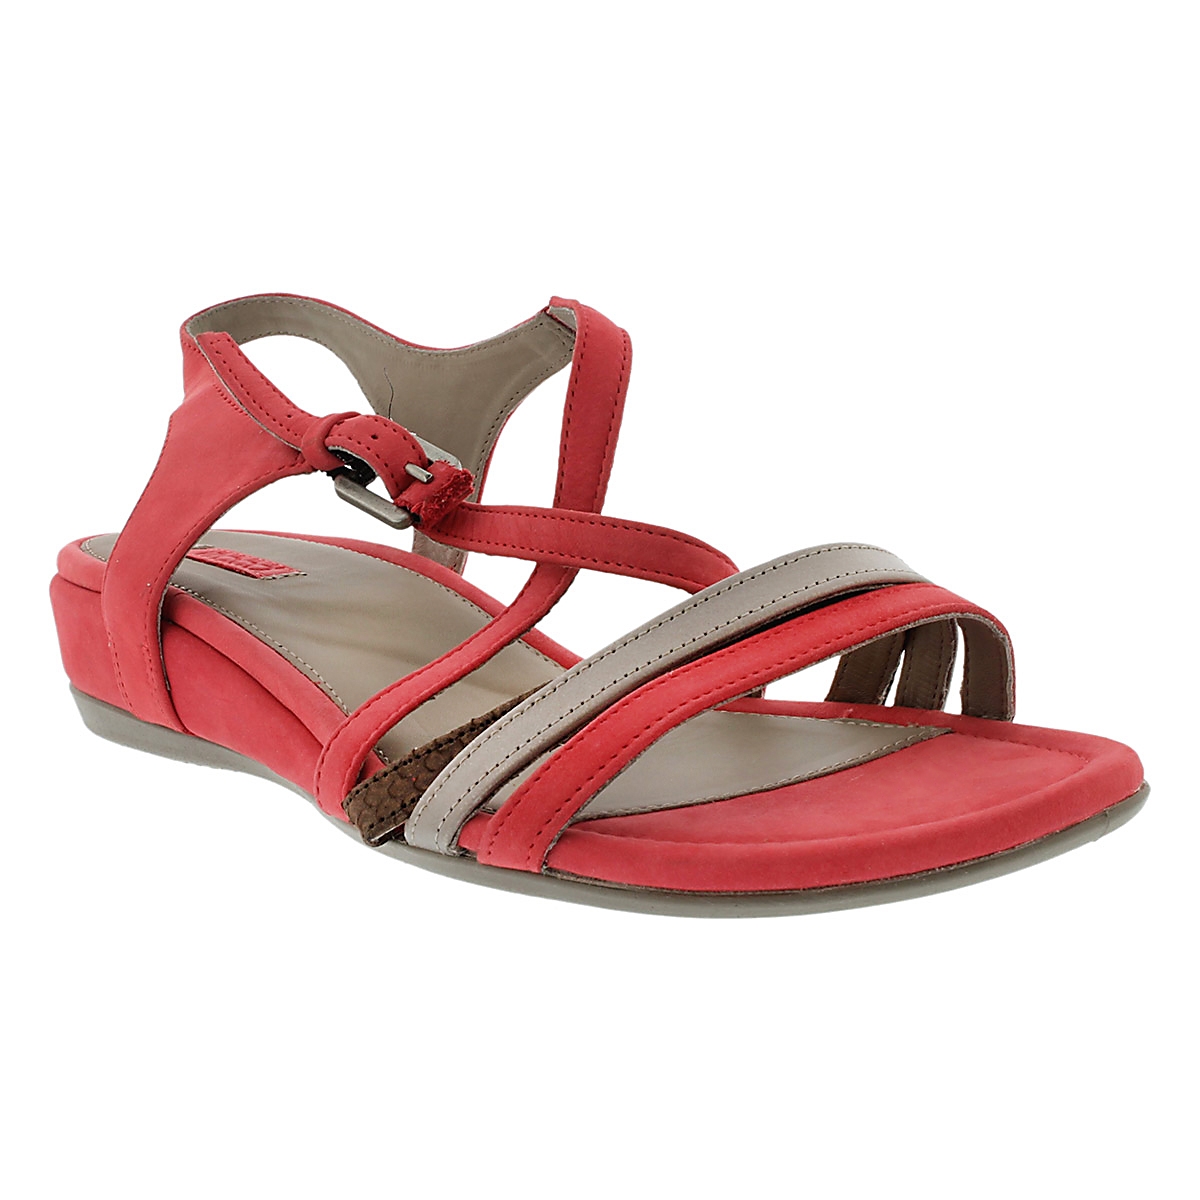 Ecco Women's TOUCH 25 berry leather dress strap sandals 262013-58563